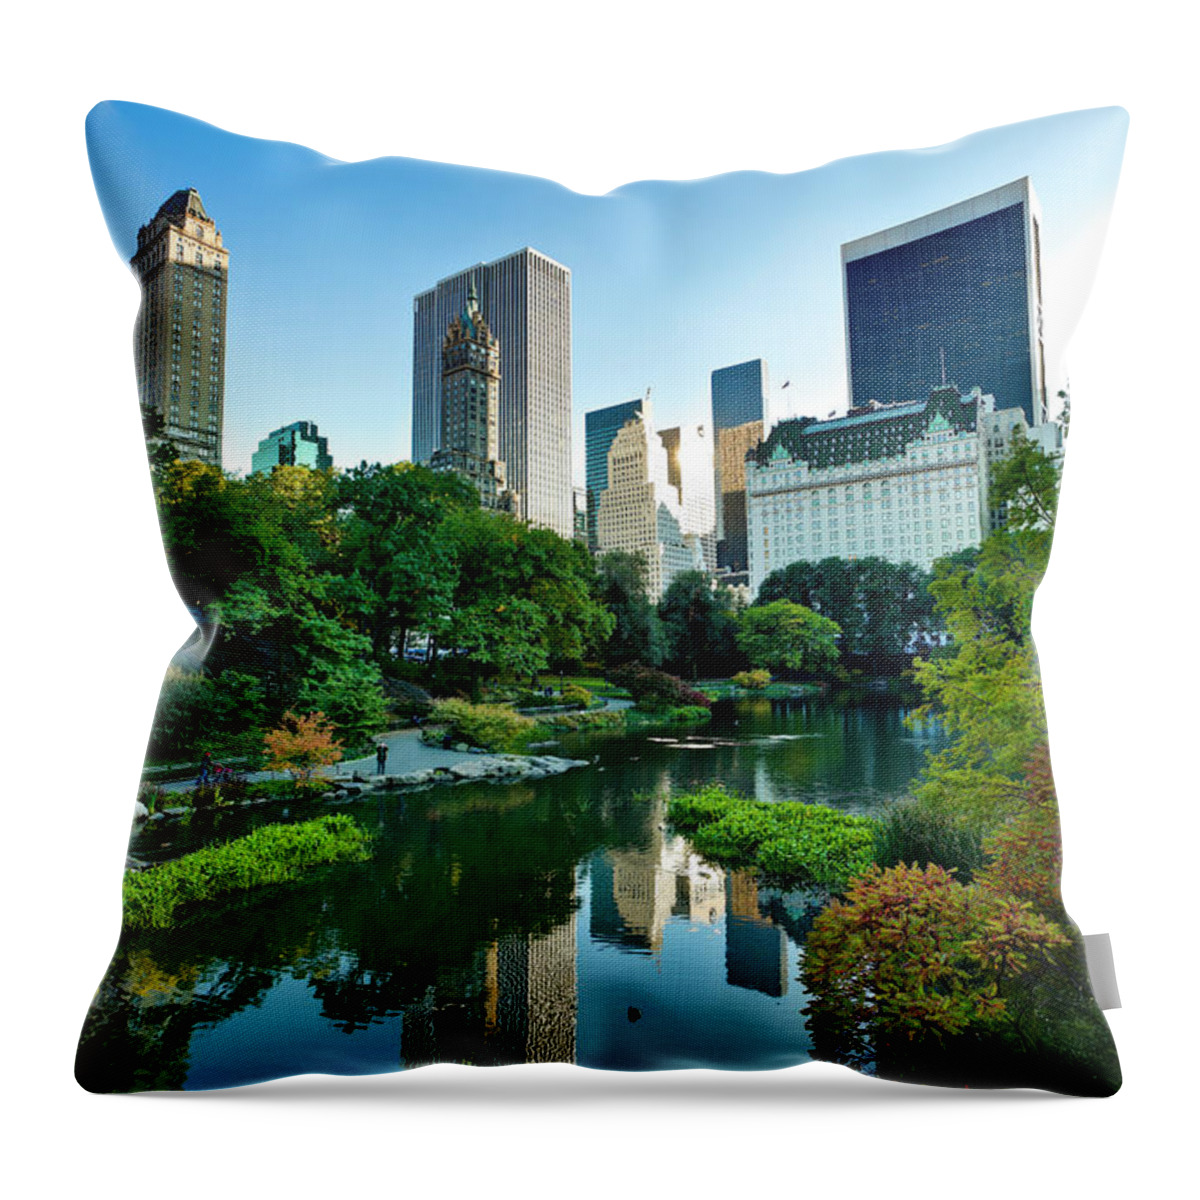 Downtown District Throw Pillow featuring the photograph Central Park In New York City #1 by Pawel.gaul